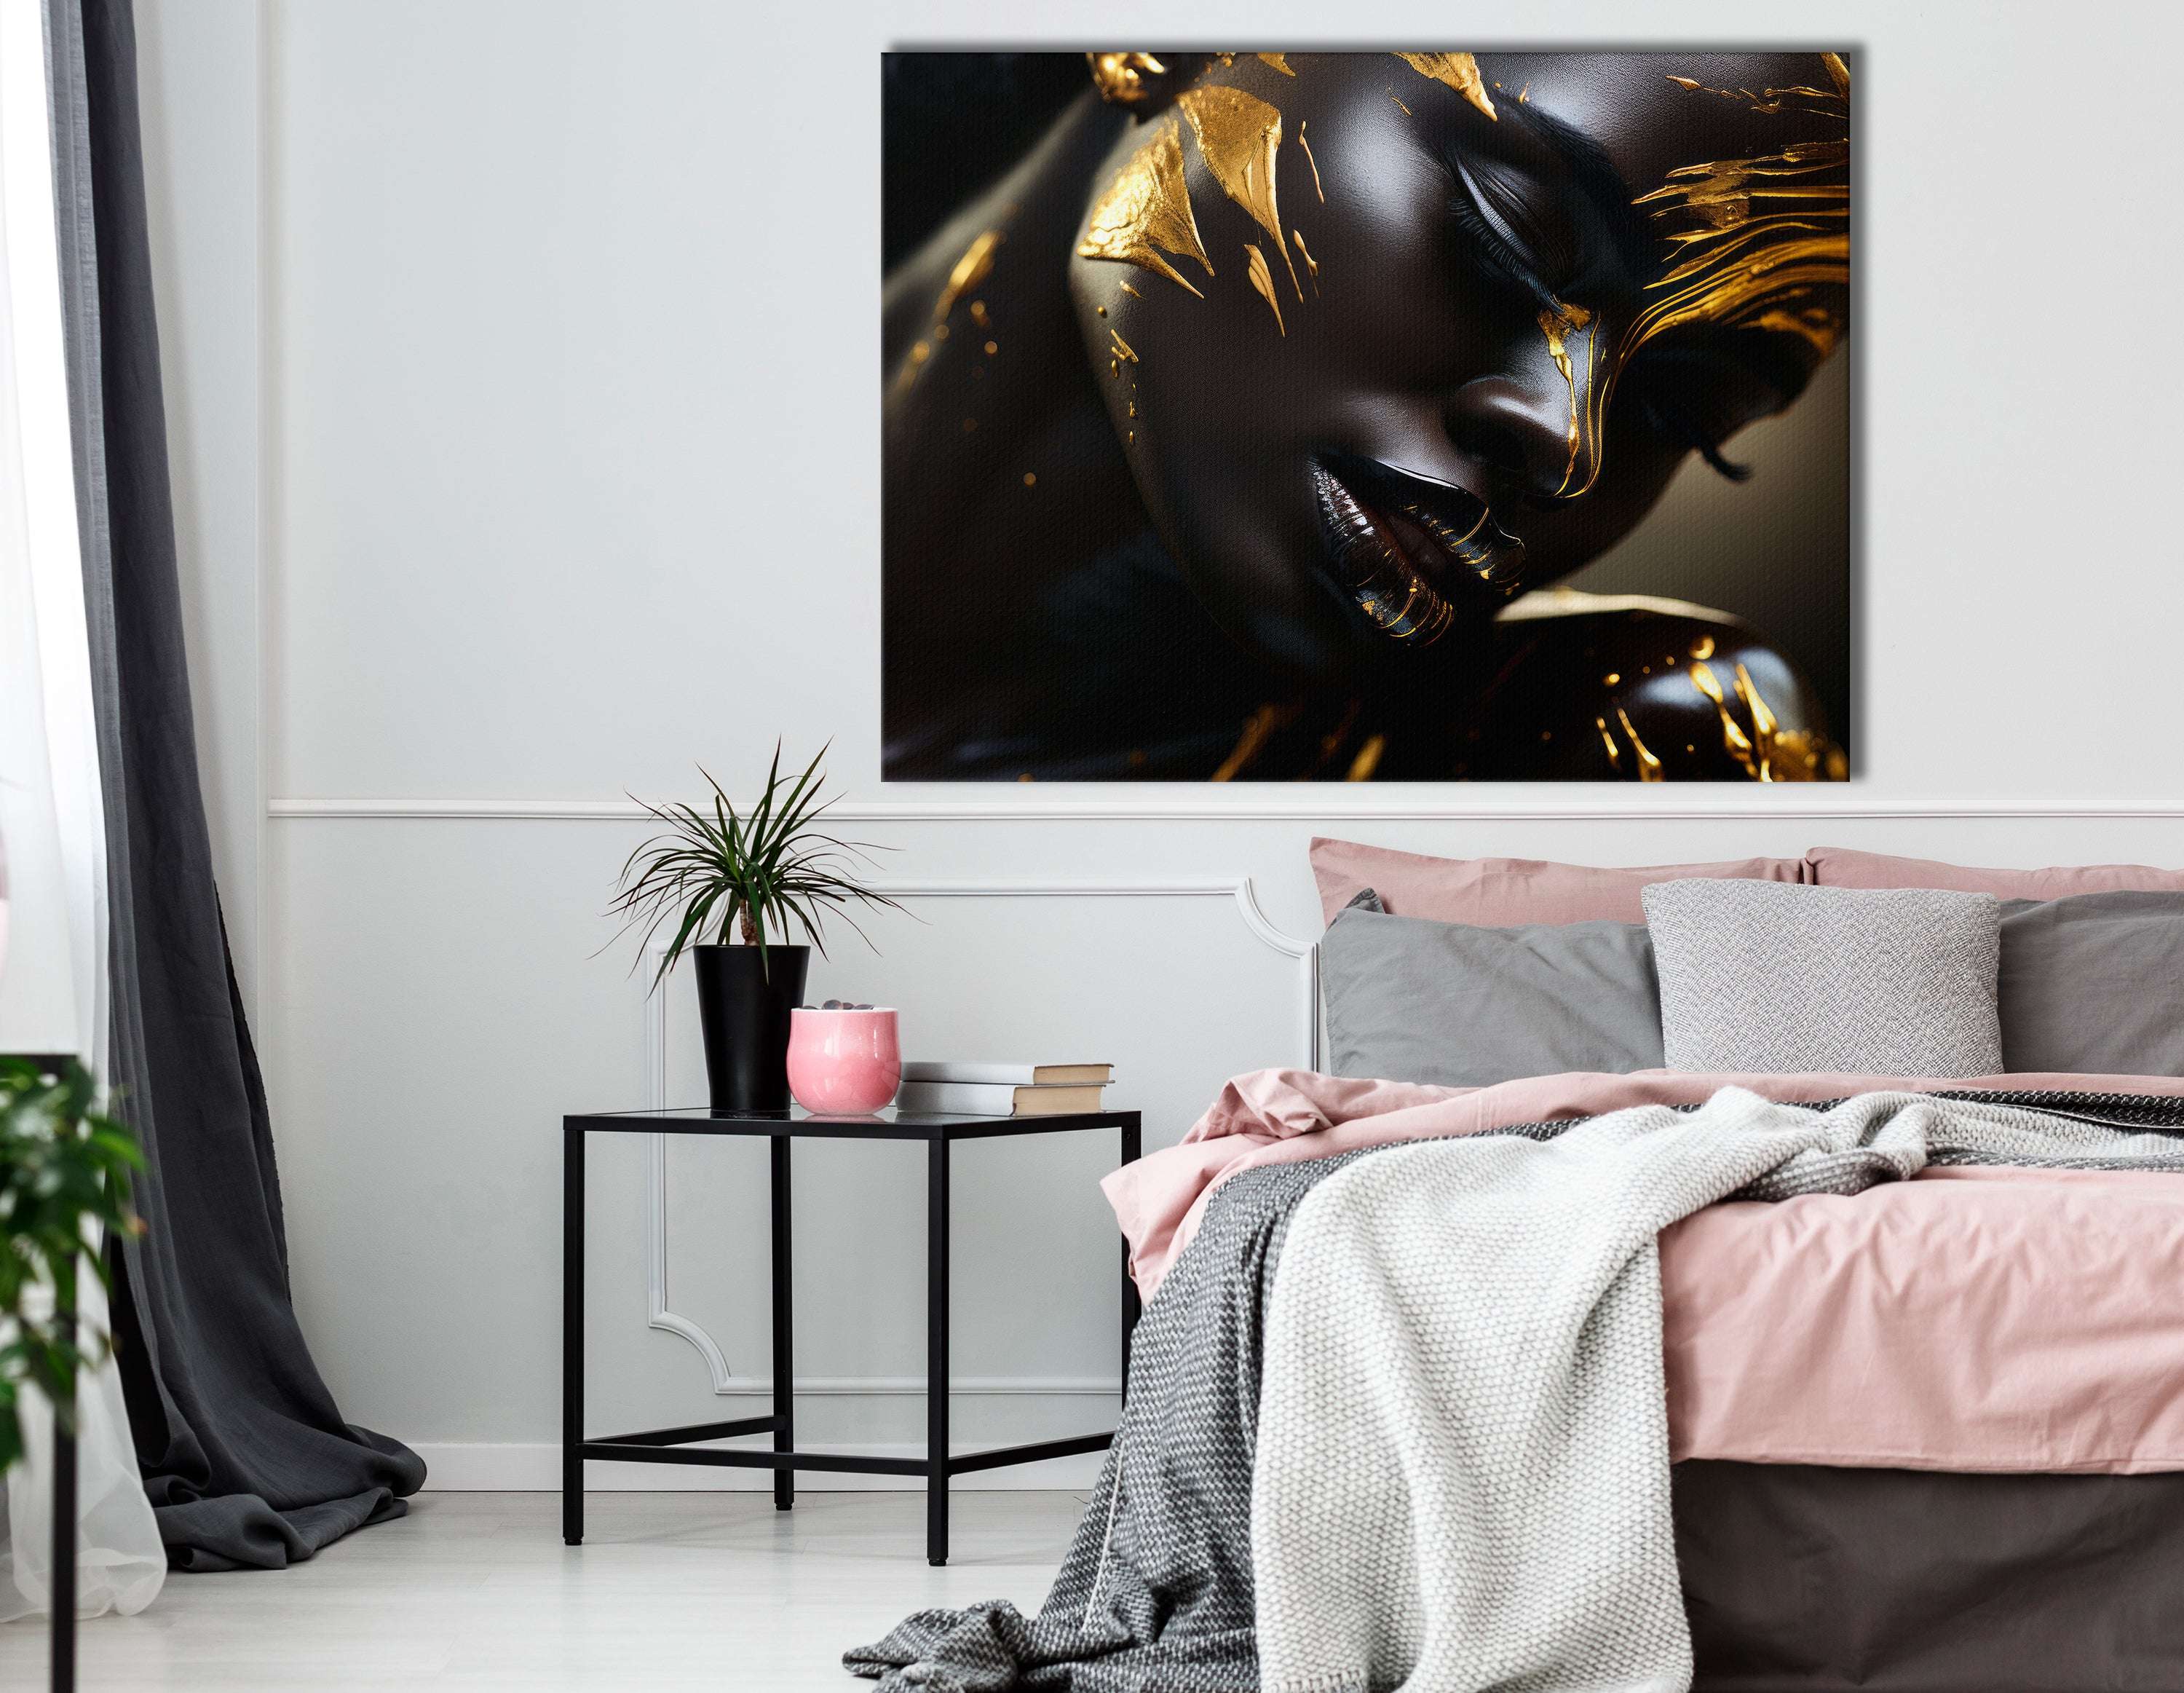 Portrait of a Graceful Black Lady covered in Gold - Canvas Print - Artoholica Ready to Hang Canvas Print